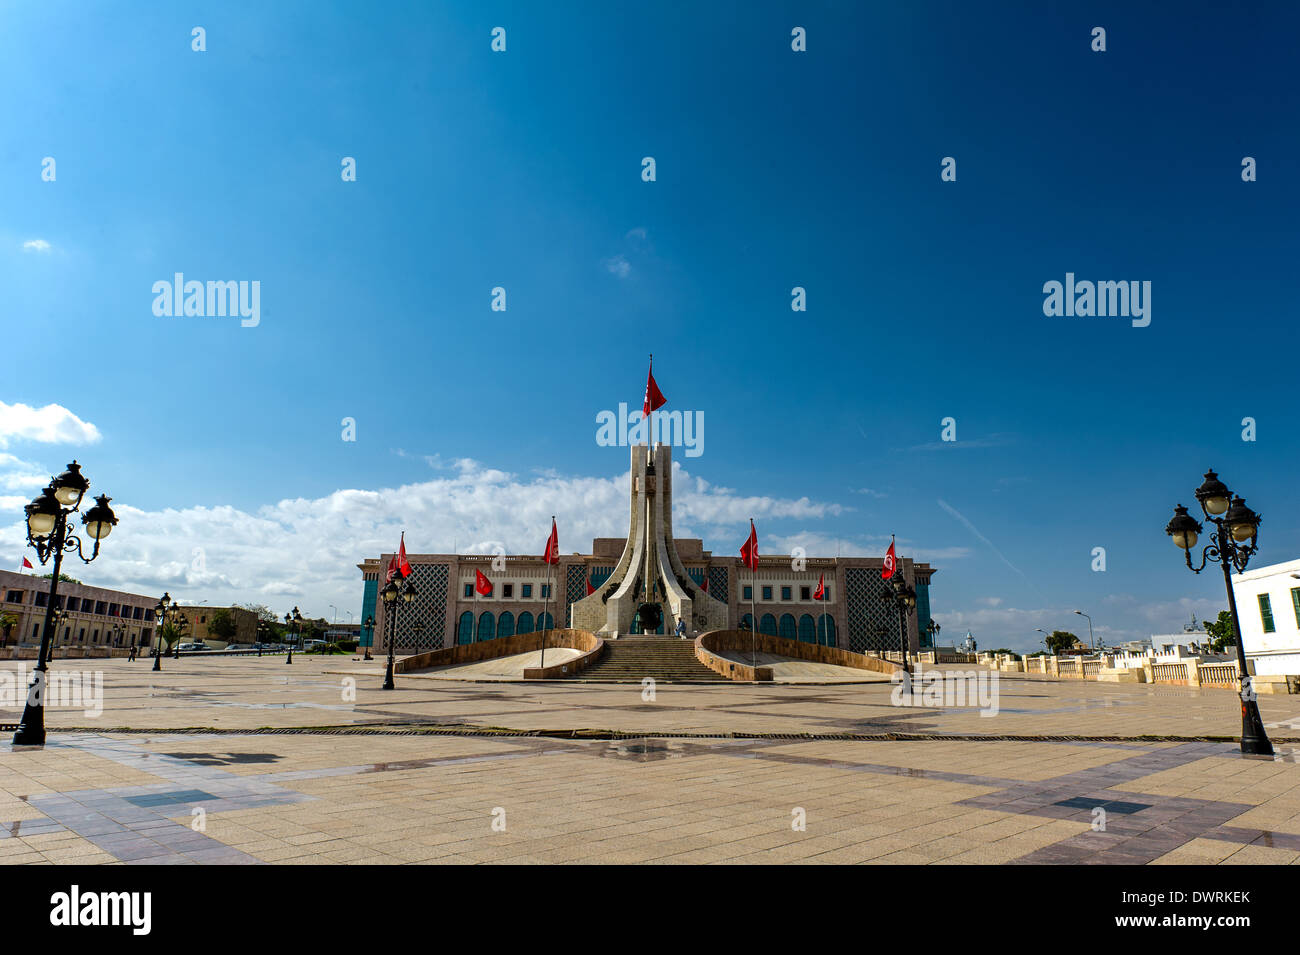 North Africa, Tunisia, Tunis. Kasbah square and mayor of Tunis in the background. Stock Photo